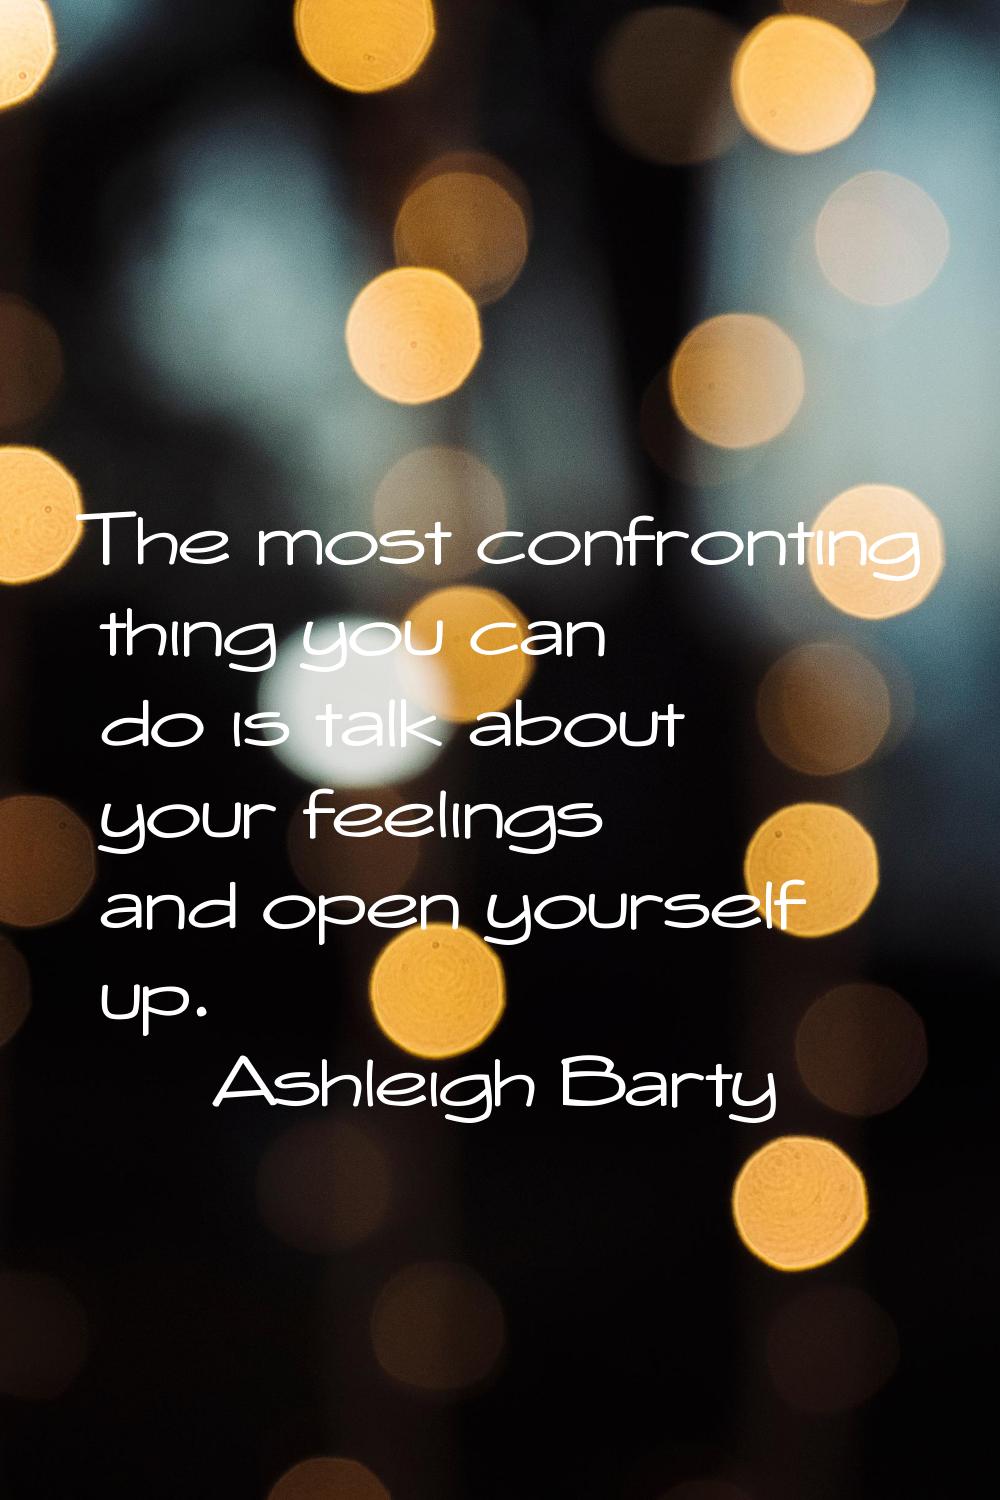 The most confronting thing you can do is talk about your feelings and open yourself up.